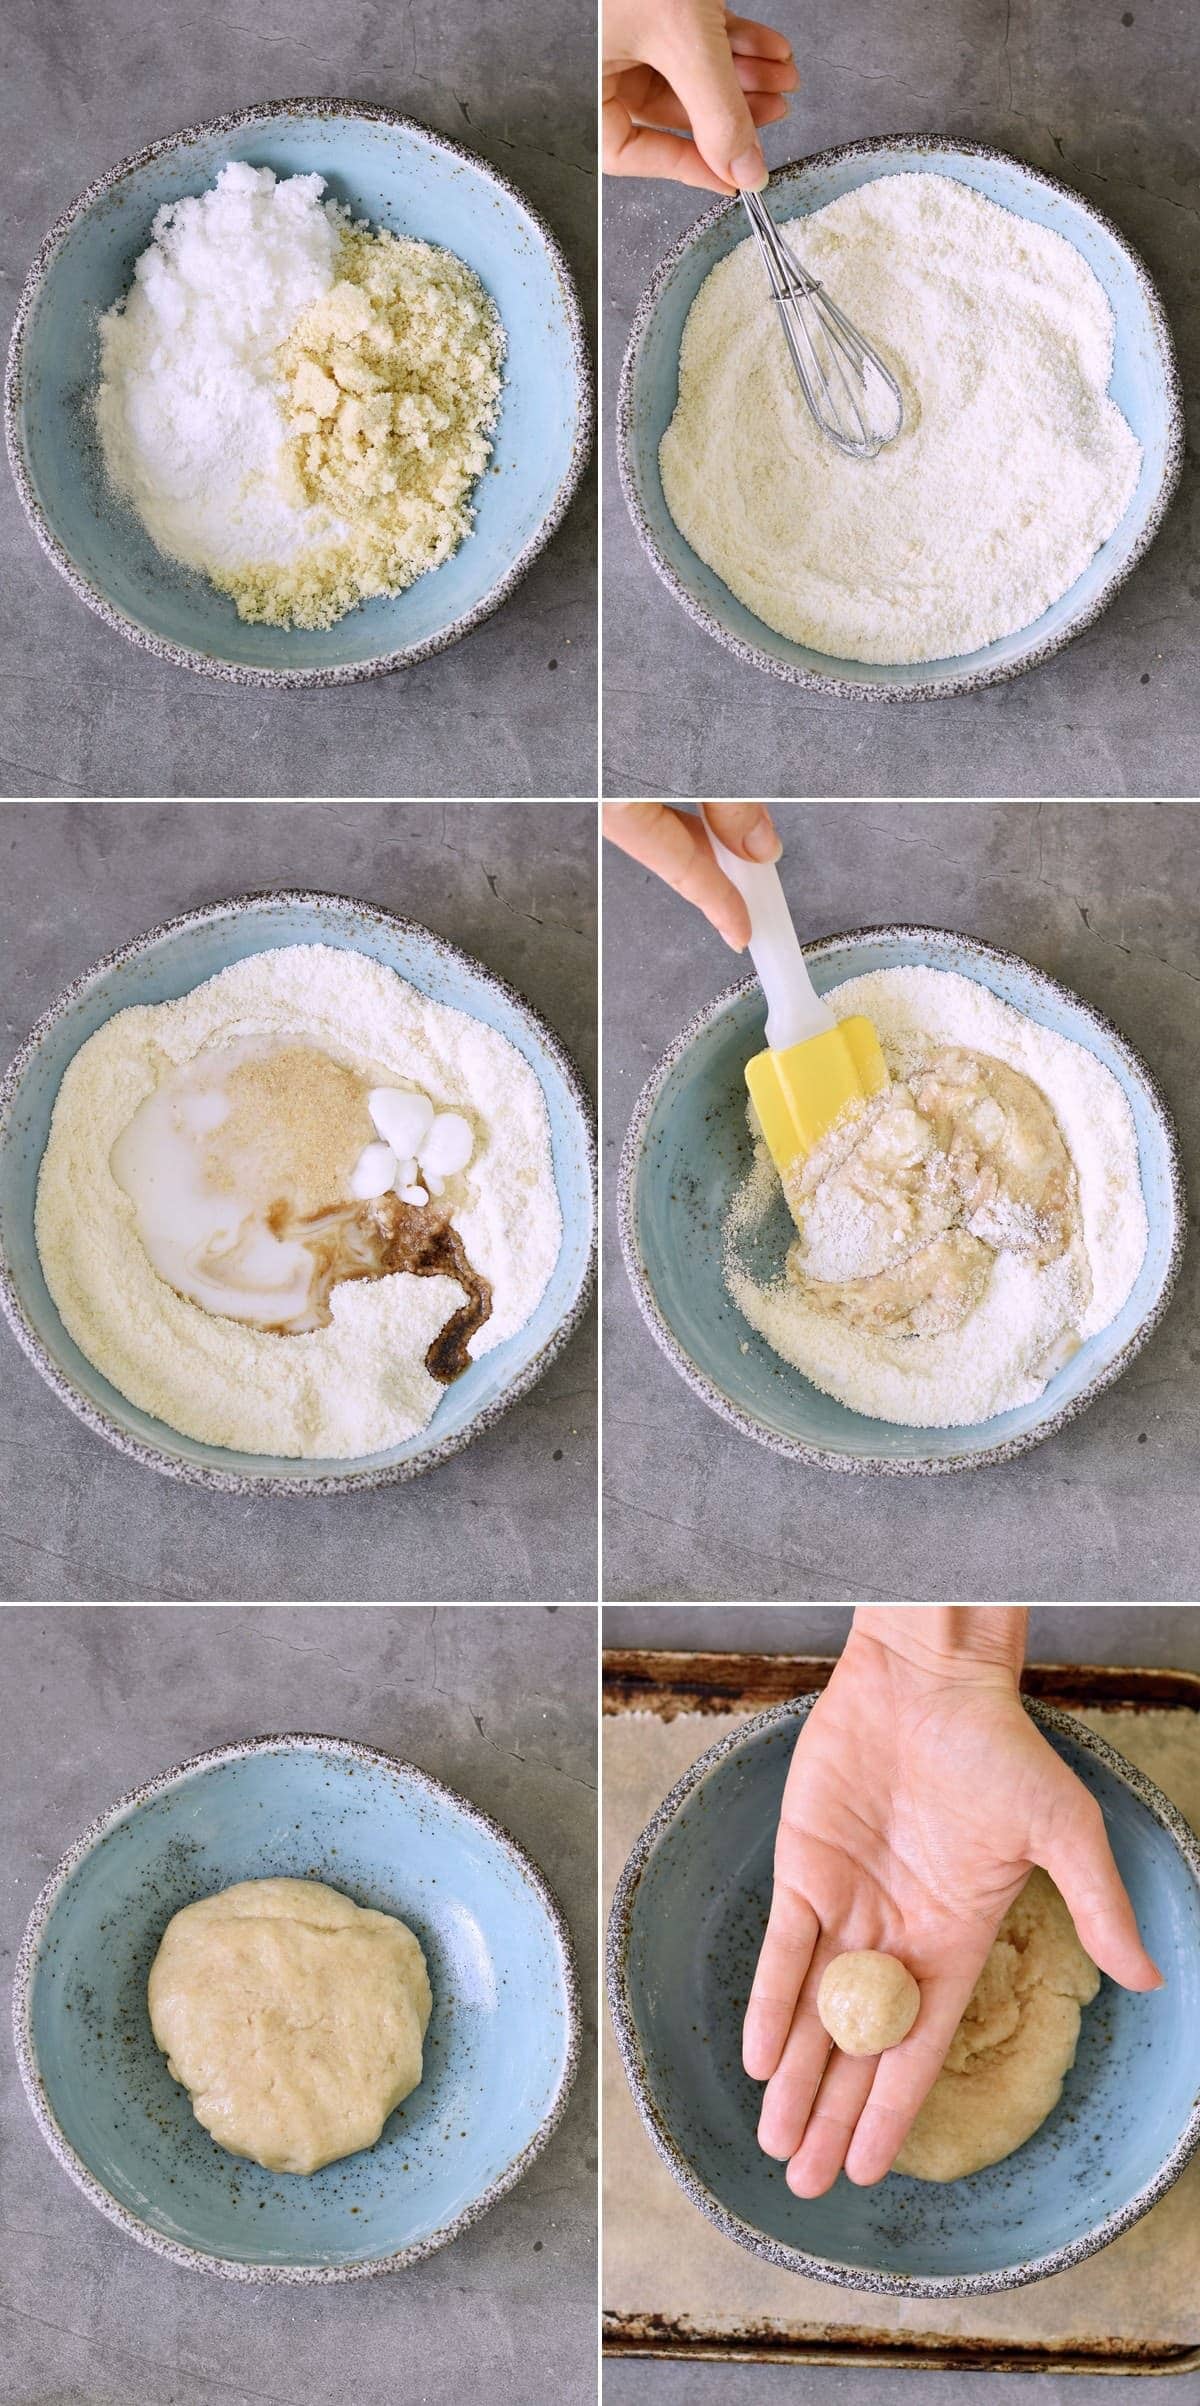 6 step-by-step photos showing how to make a cookie dough